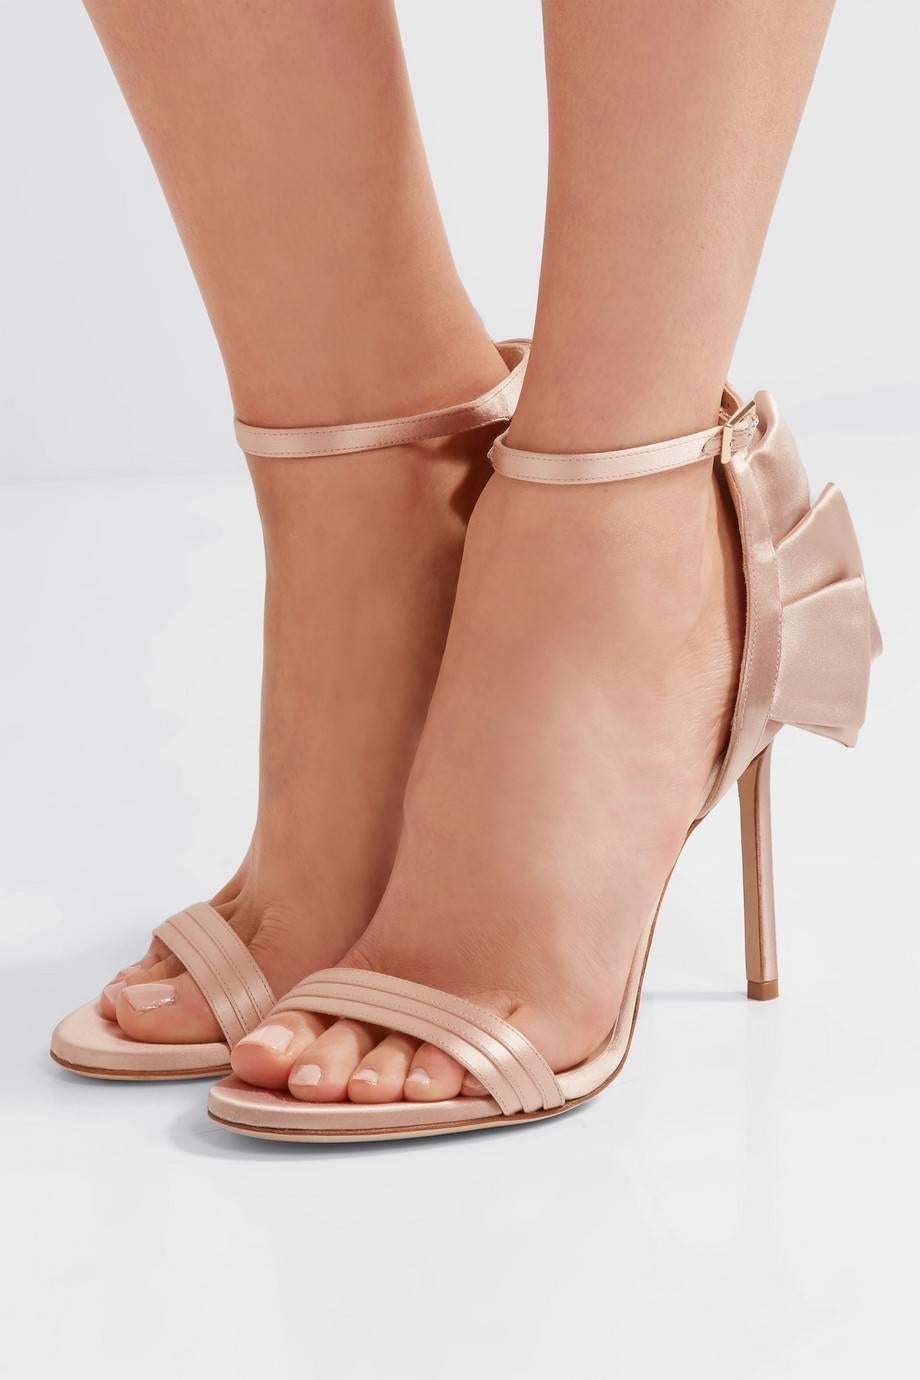 Jimmy Choo New Satin Champagne Evening Sandals Heels in Box 

Size IT 36
Satin
Ankle tie closure
Made in Italy
Heel height 4" (100mm)
Includes original Jimmy Choo ox